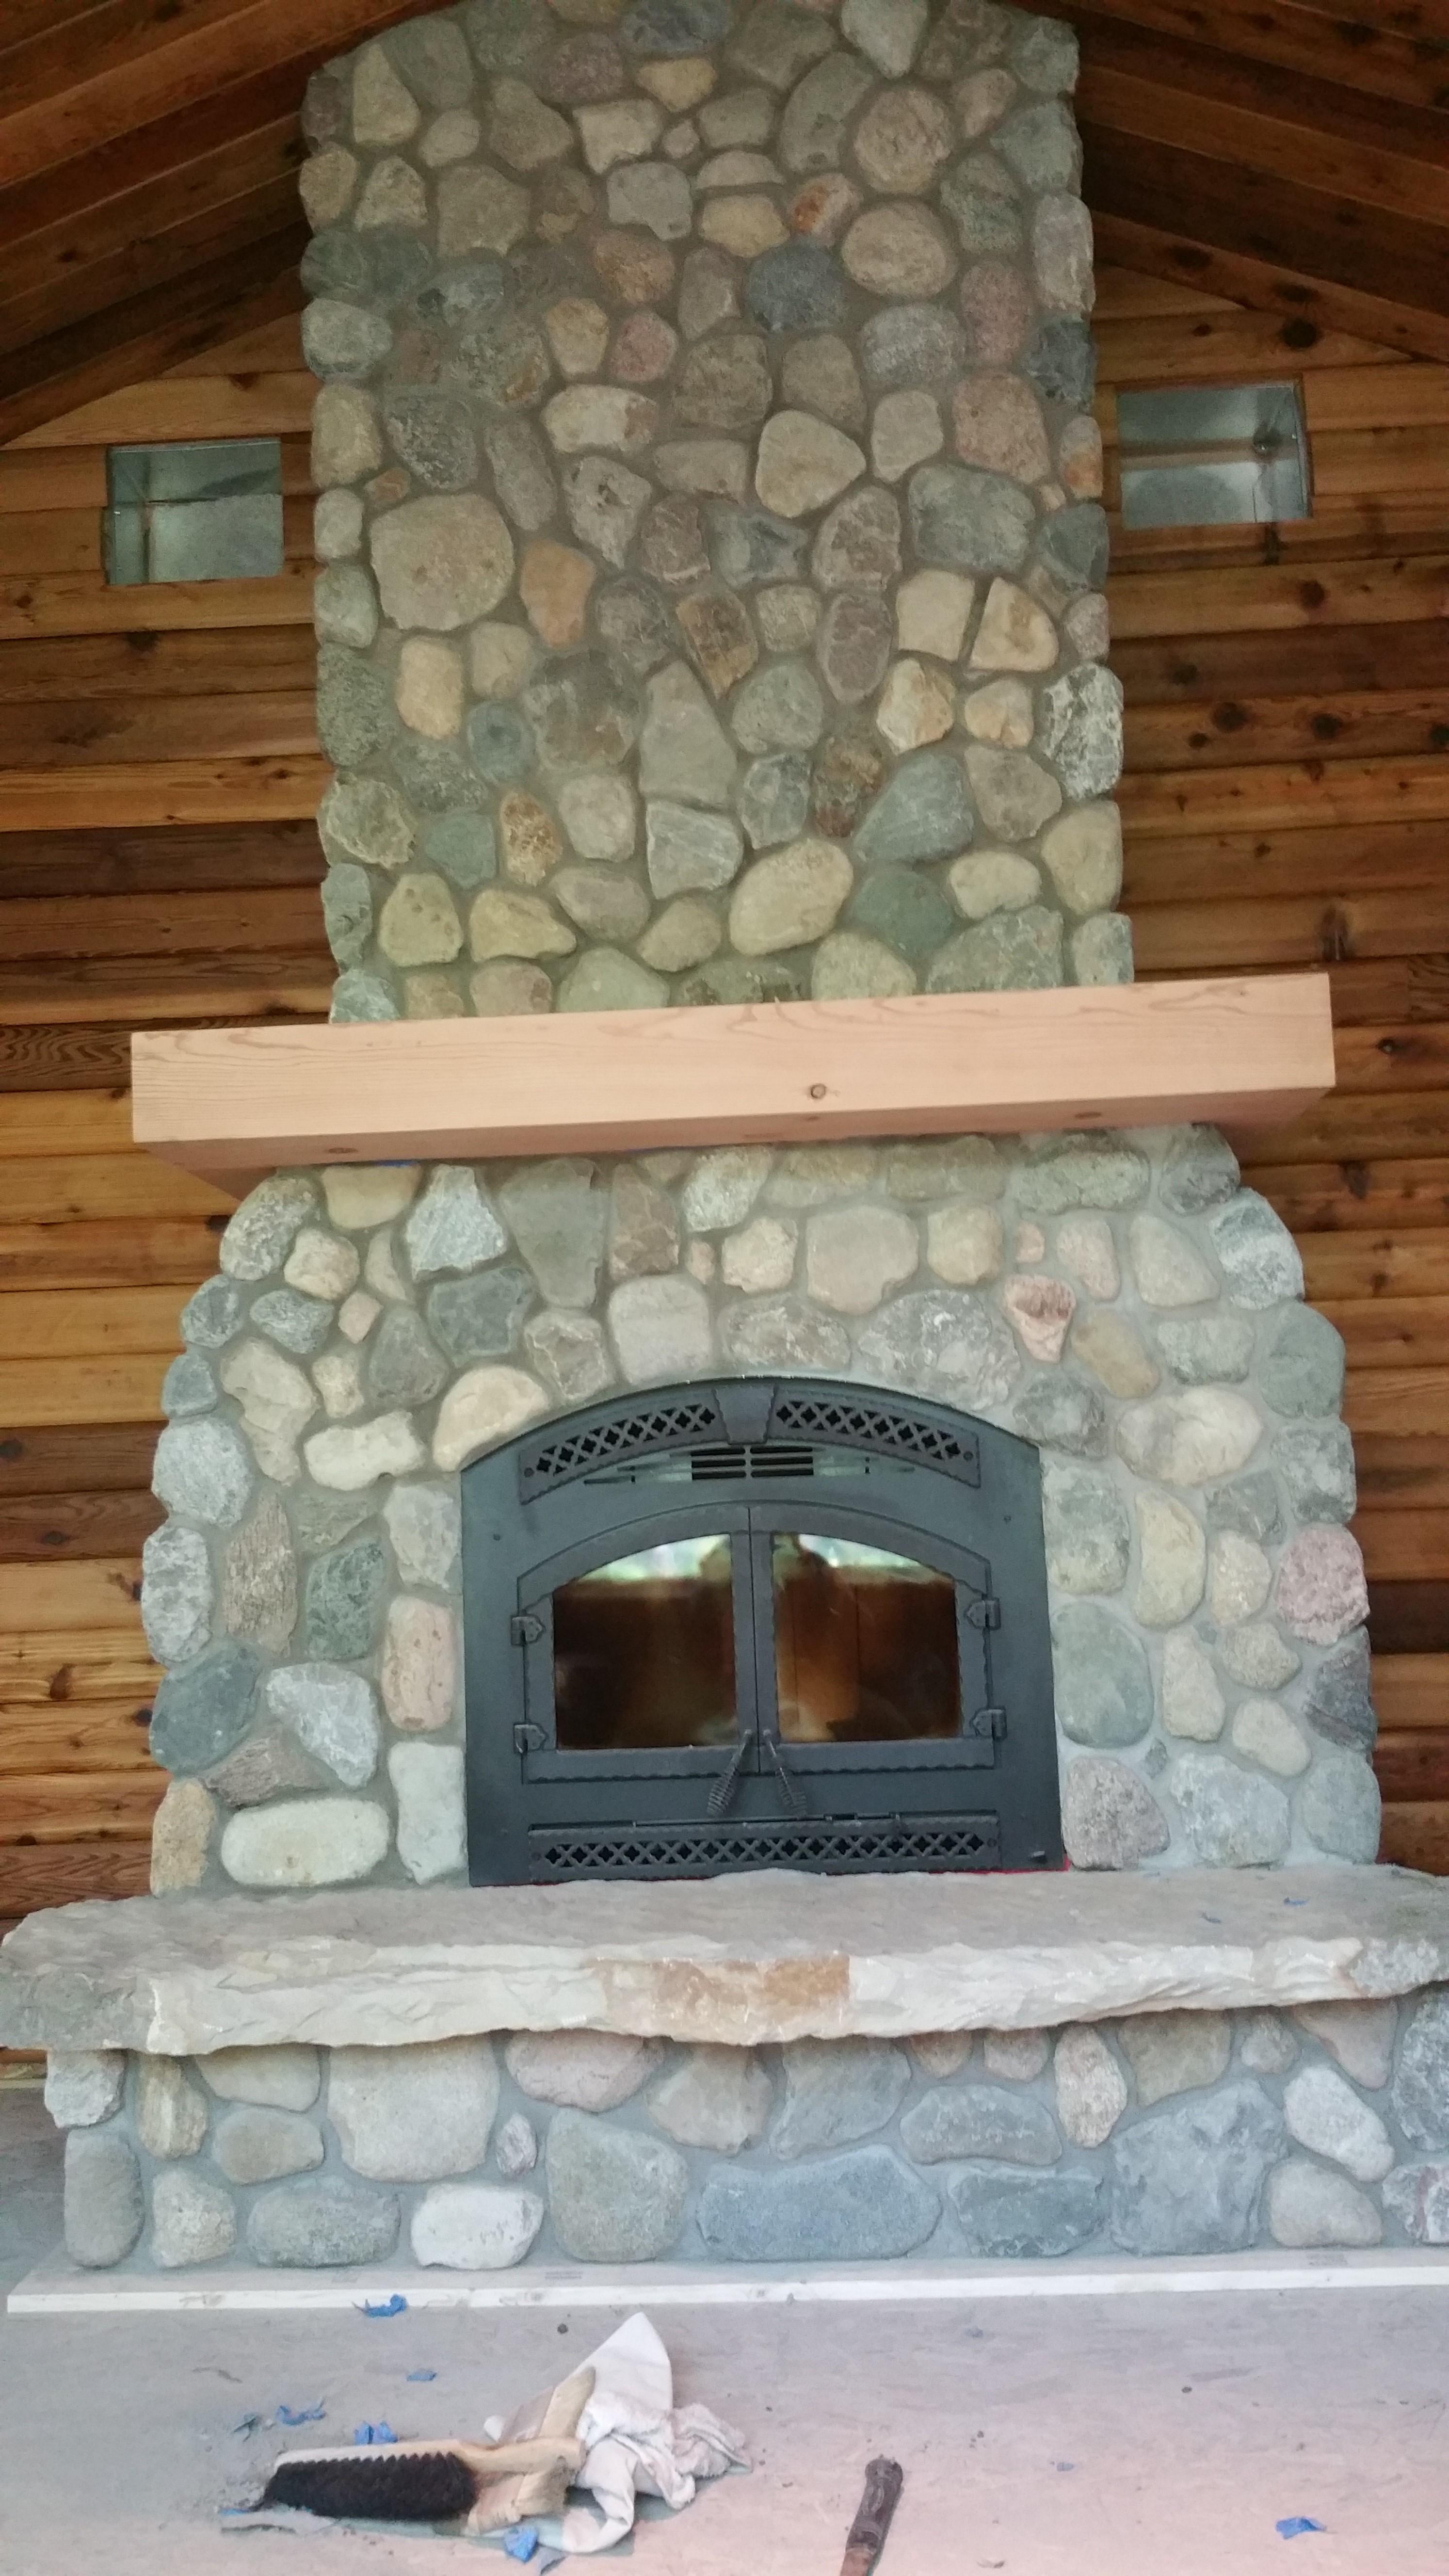 this fireplace is made of Indiana rubble. The hearth came from a creek bed in Green county. We actually hand carved the hearth, no saw cut edges here all natural. The mantel is constructed from structural members from the original log cabin that was on this site as is the logs on the wall behind the fireplace. I think this is the best one we have put together yet!